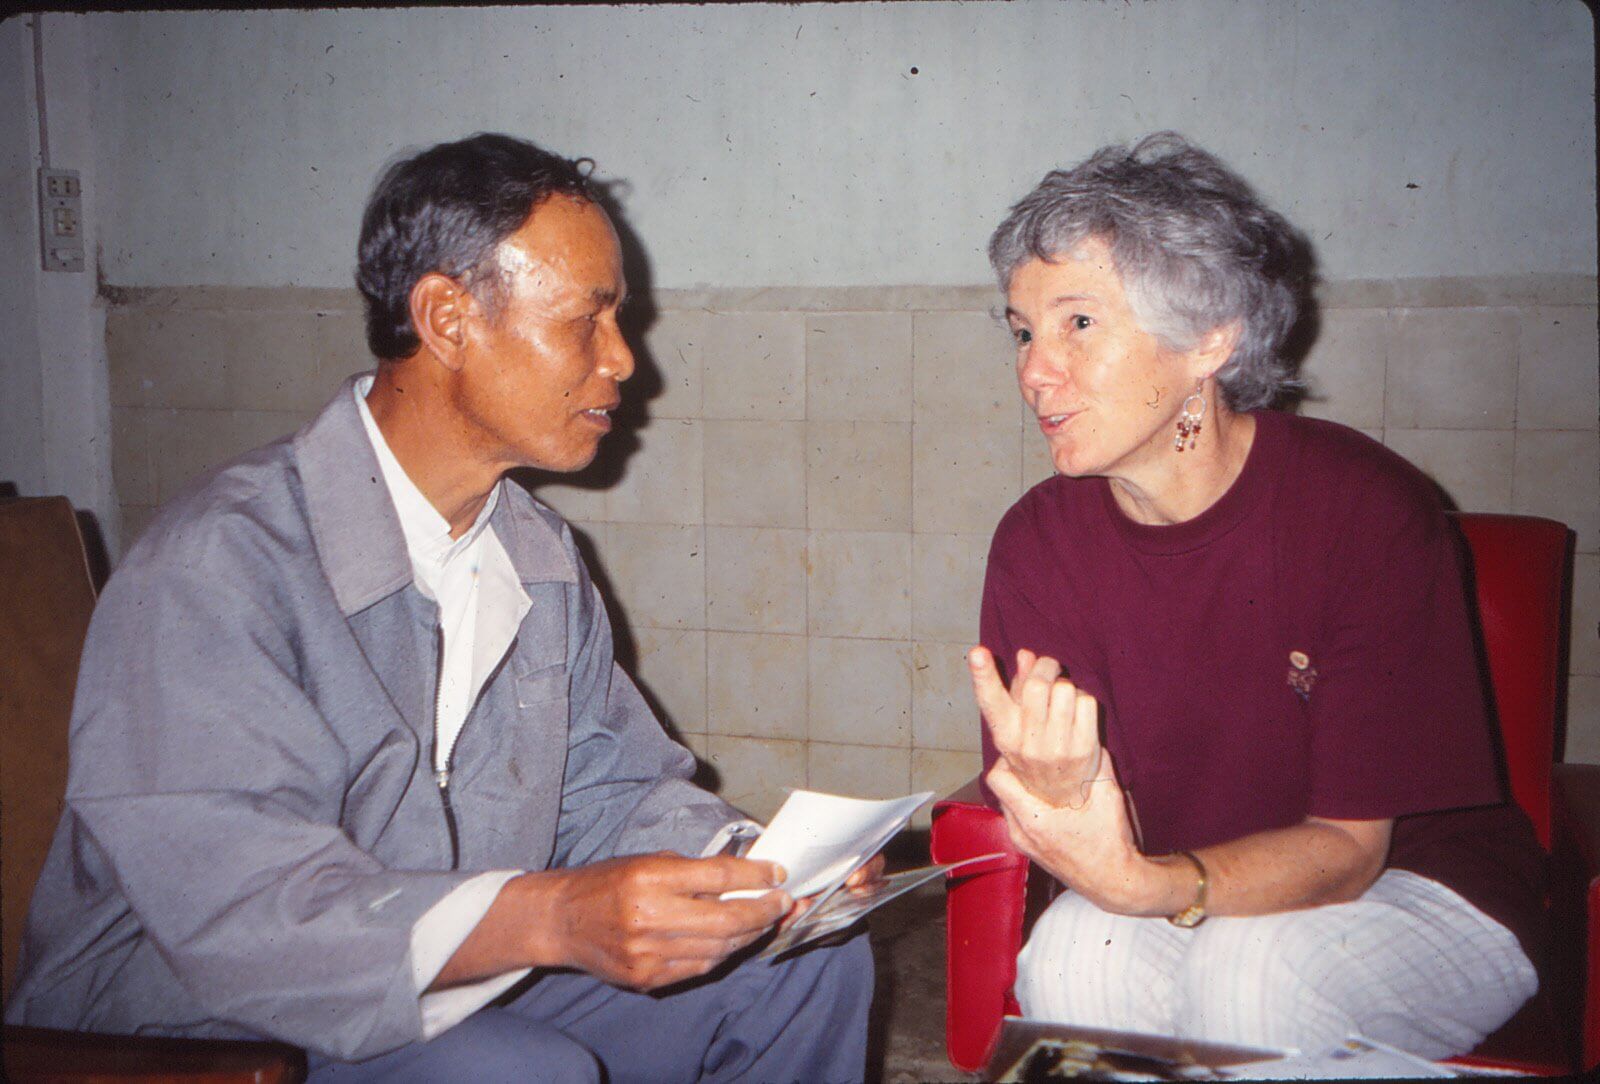 An older Vietnamese man and an older American woman talking and looking over what looks to be photos.